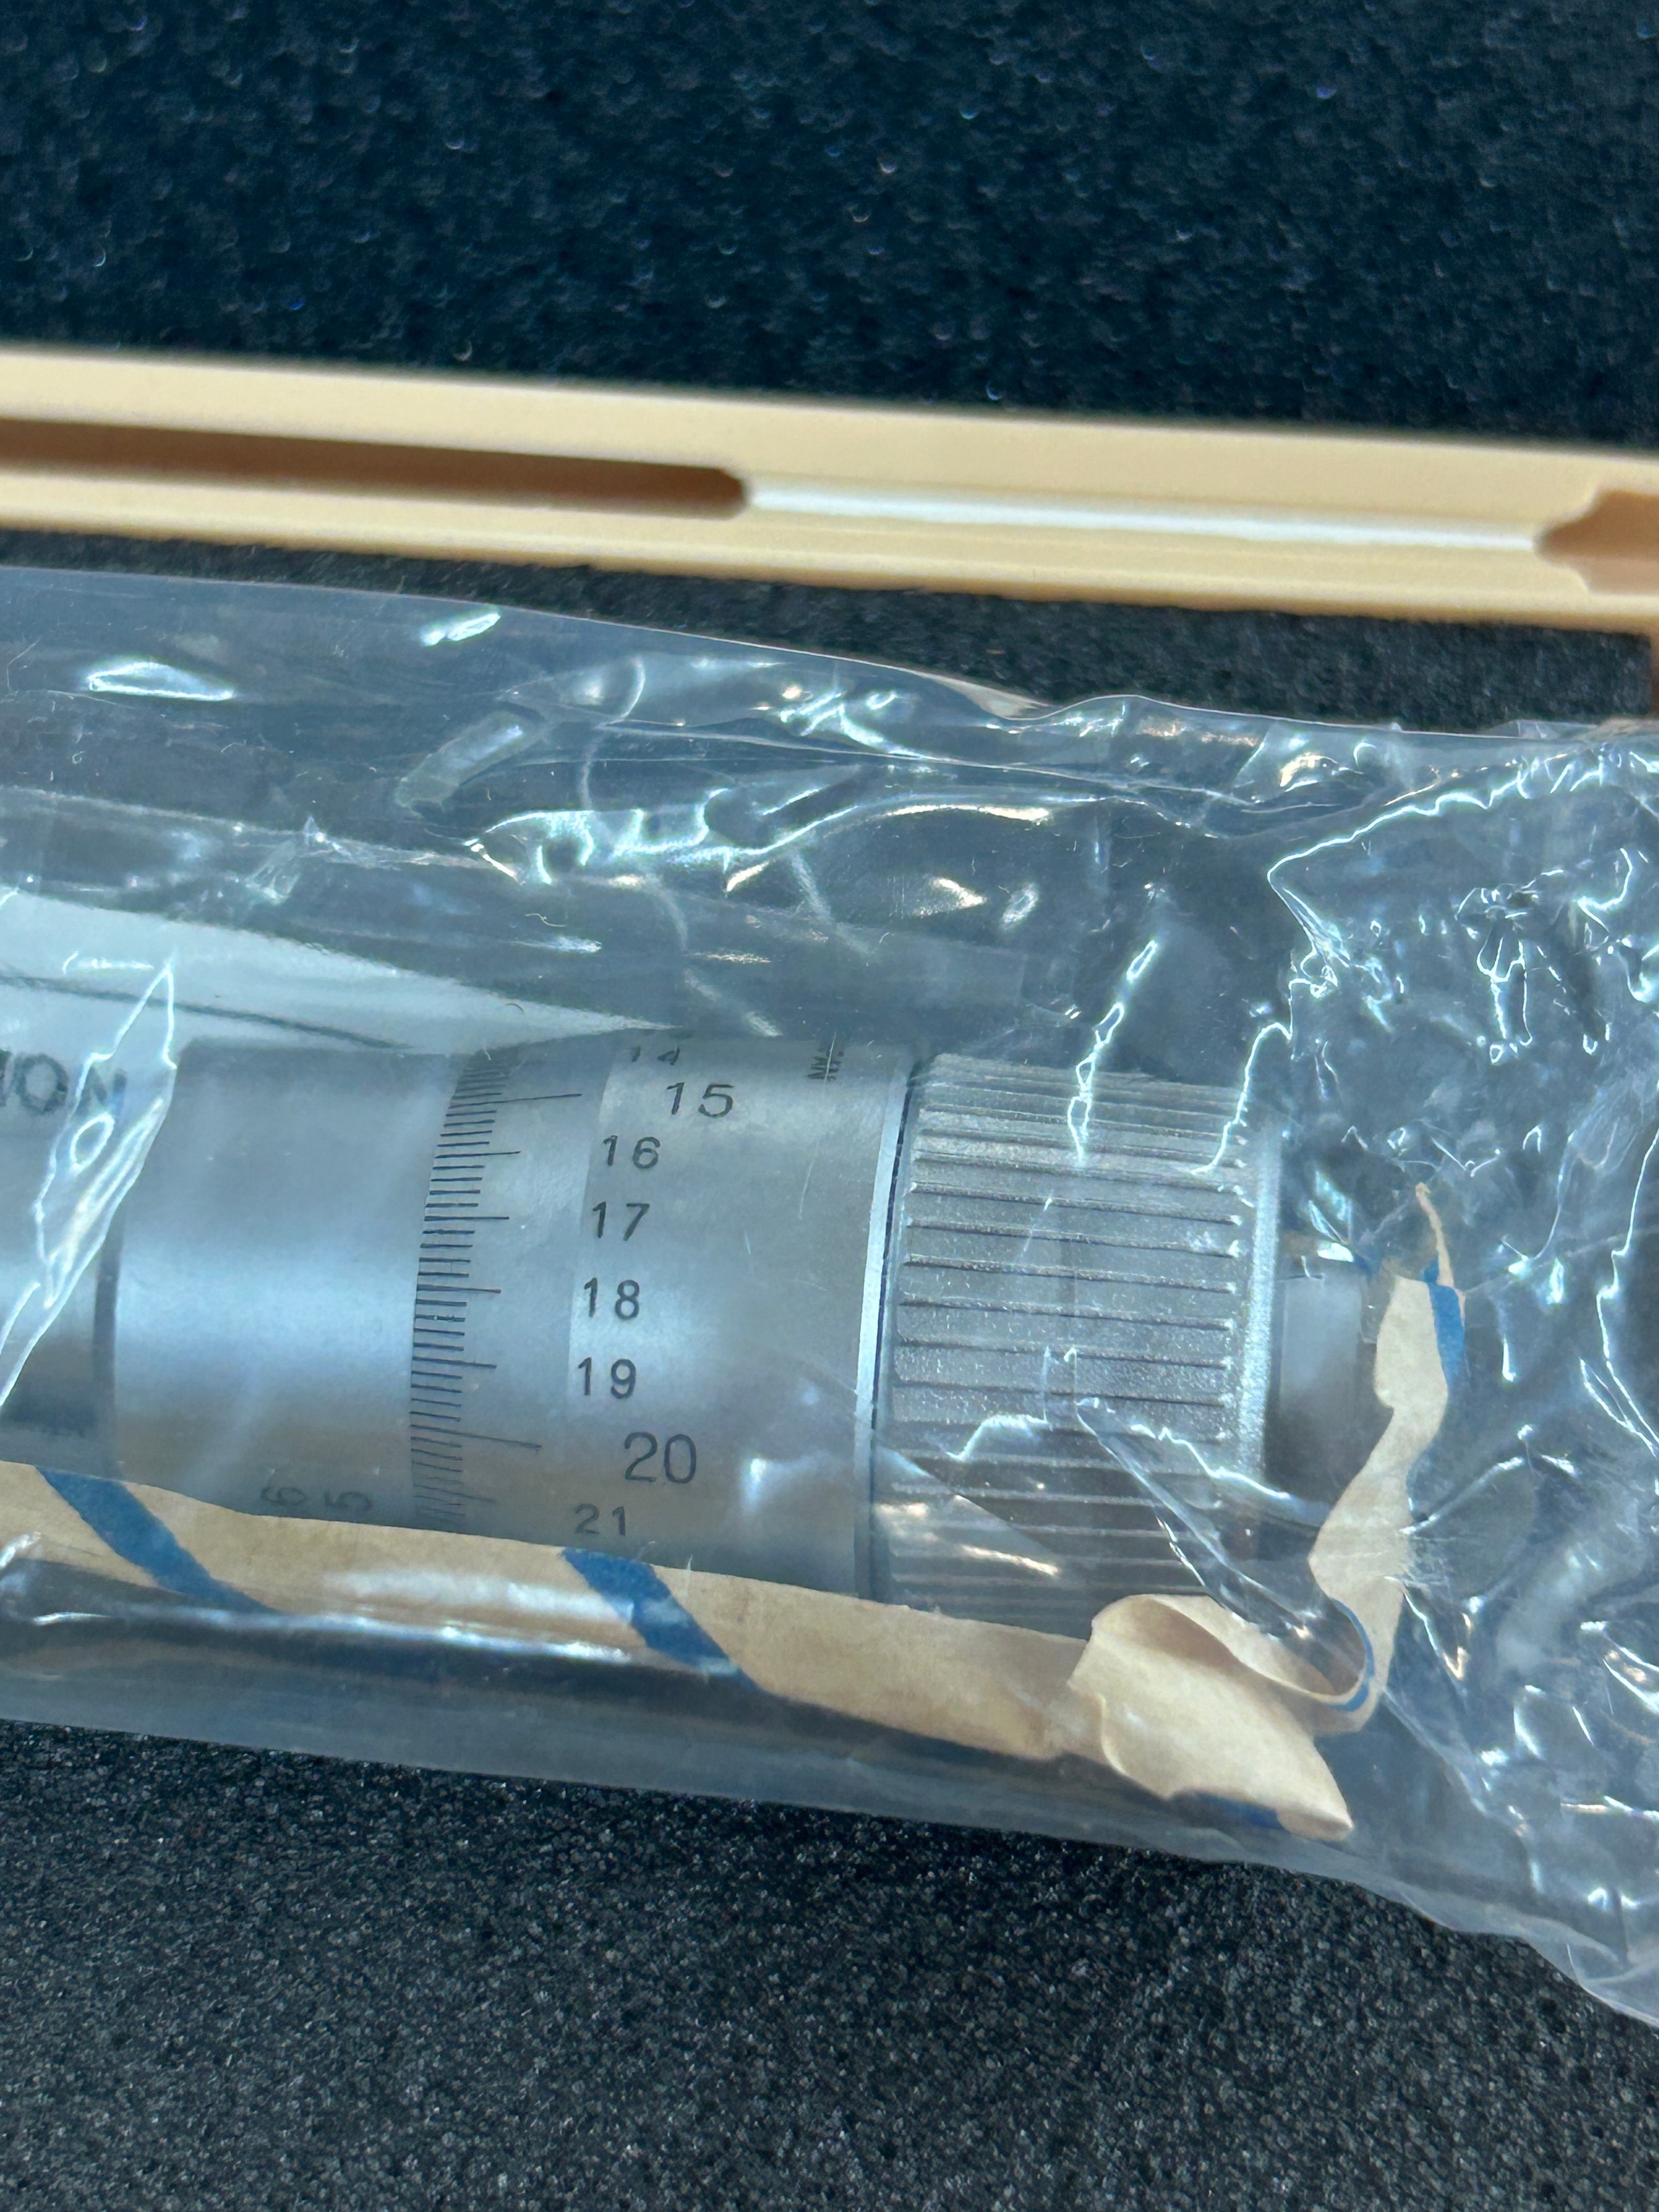 Cased Mitutoyo inside micrometers 368-864, brand new condition - Image 2 of 4